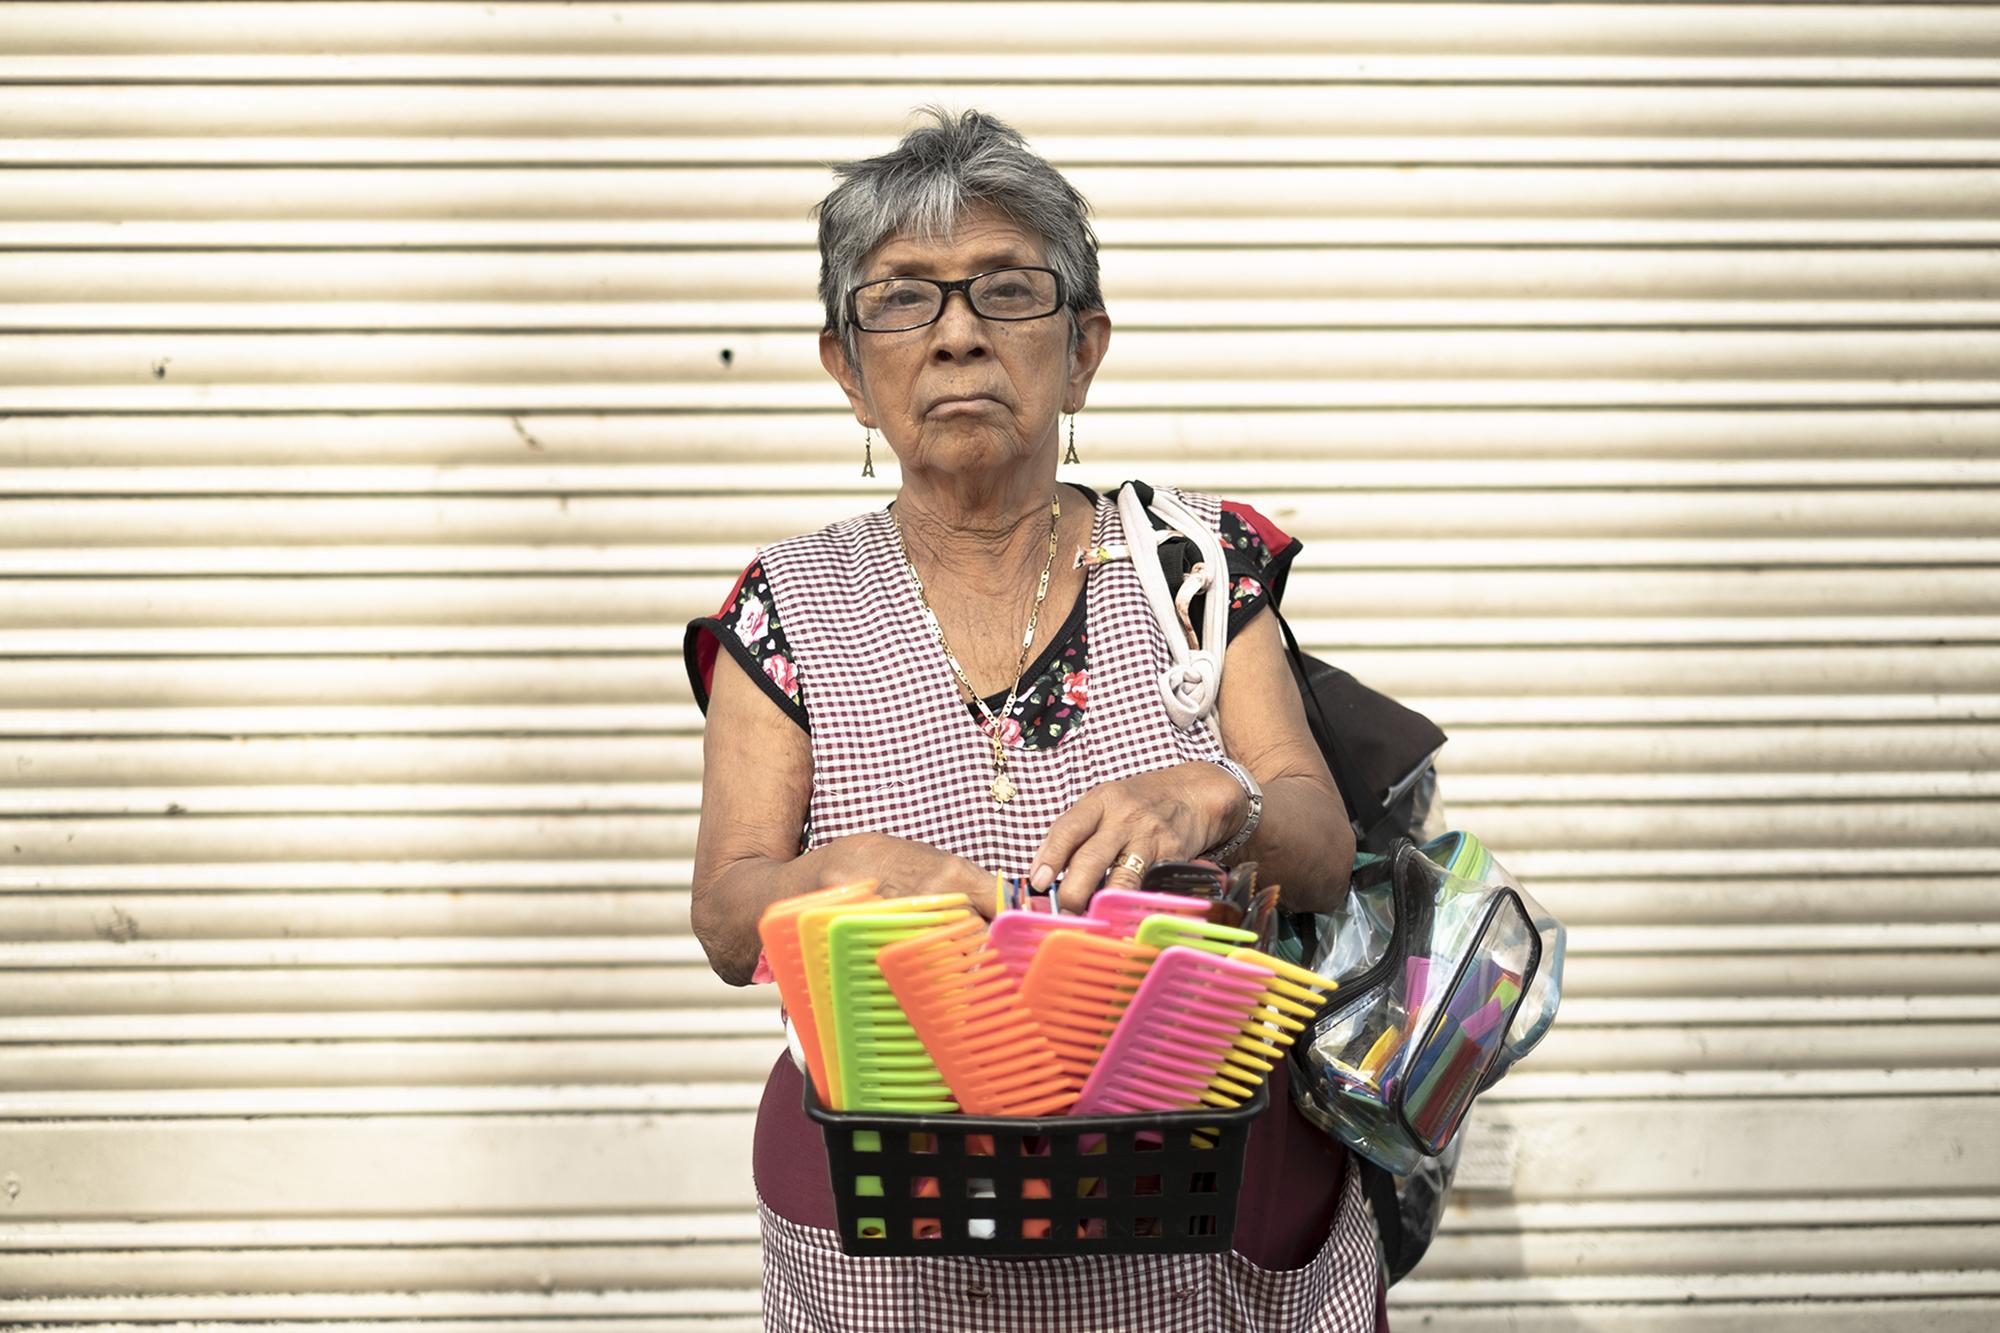 Esperanza Pérez, 83, lives in Apopa and sells combs in downtown San Salvador. A longtime traveling saleswoman of all kinds of merchandise, she’s had to reduce her load with age. “Maybe the emergency measures will save a few people, especially among those with fixed jobs and a good salary,” she said. “But for the old and poor, the only option is to take to the streets to pay for that day’s meal.”